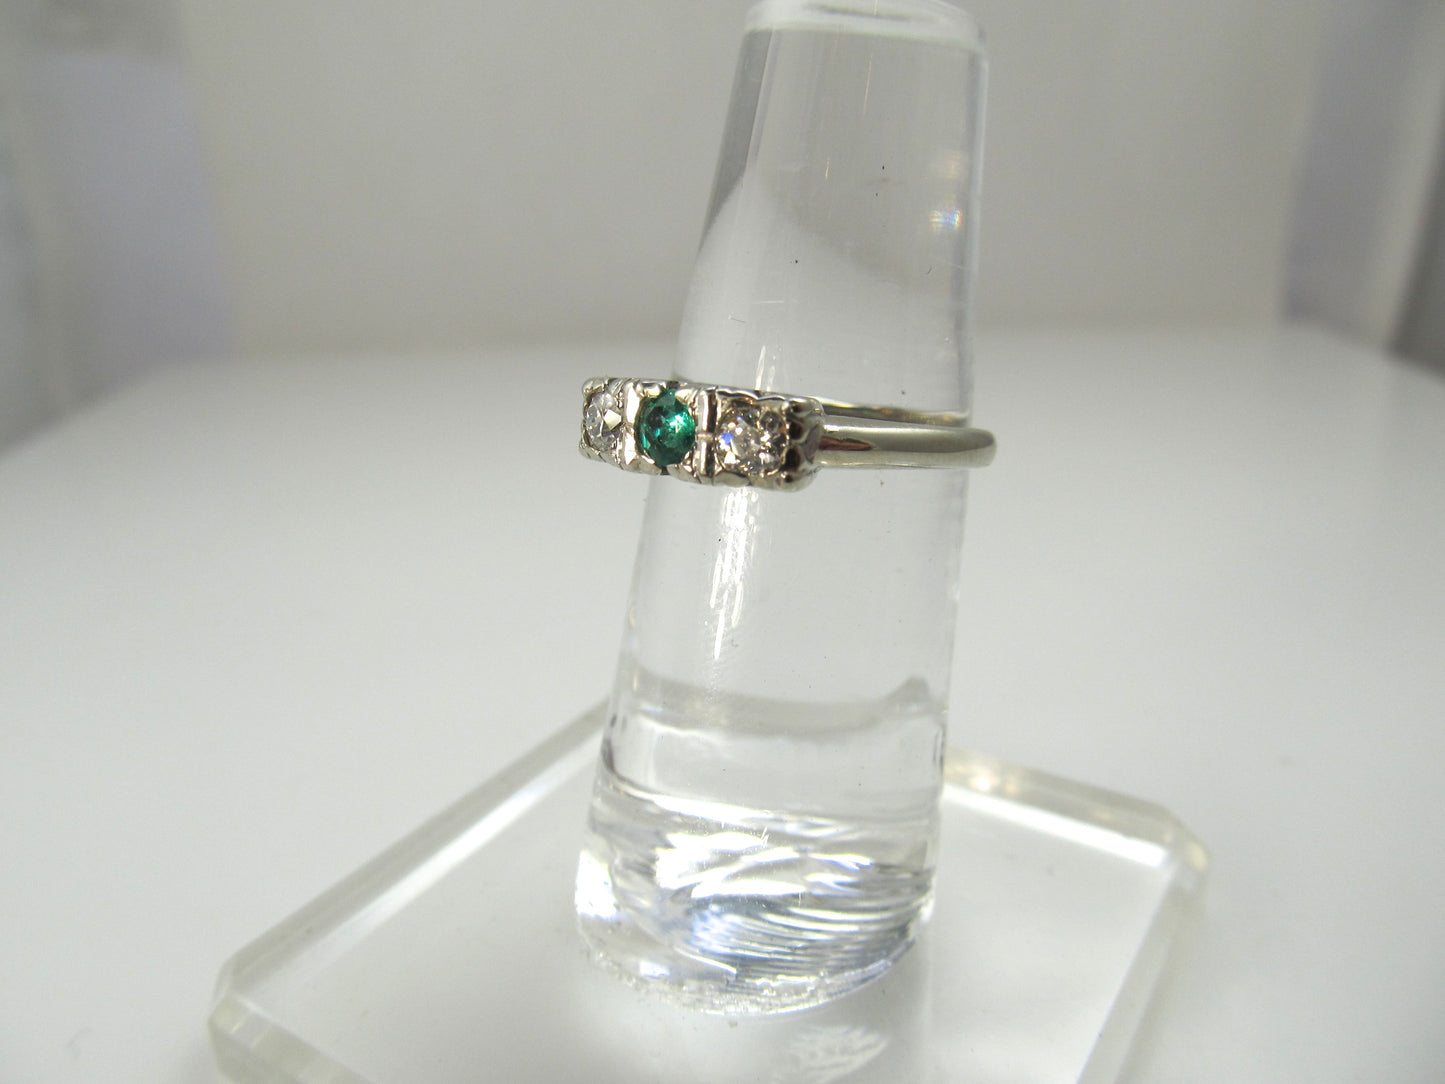 Vintage 14k white gold emerald and diamond ring